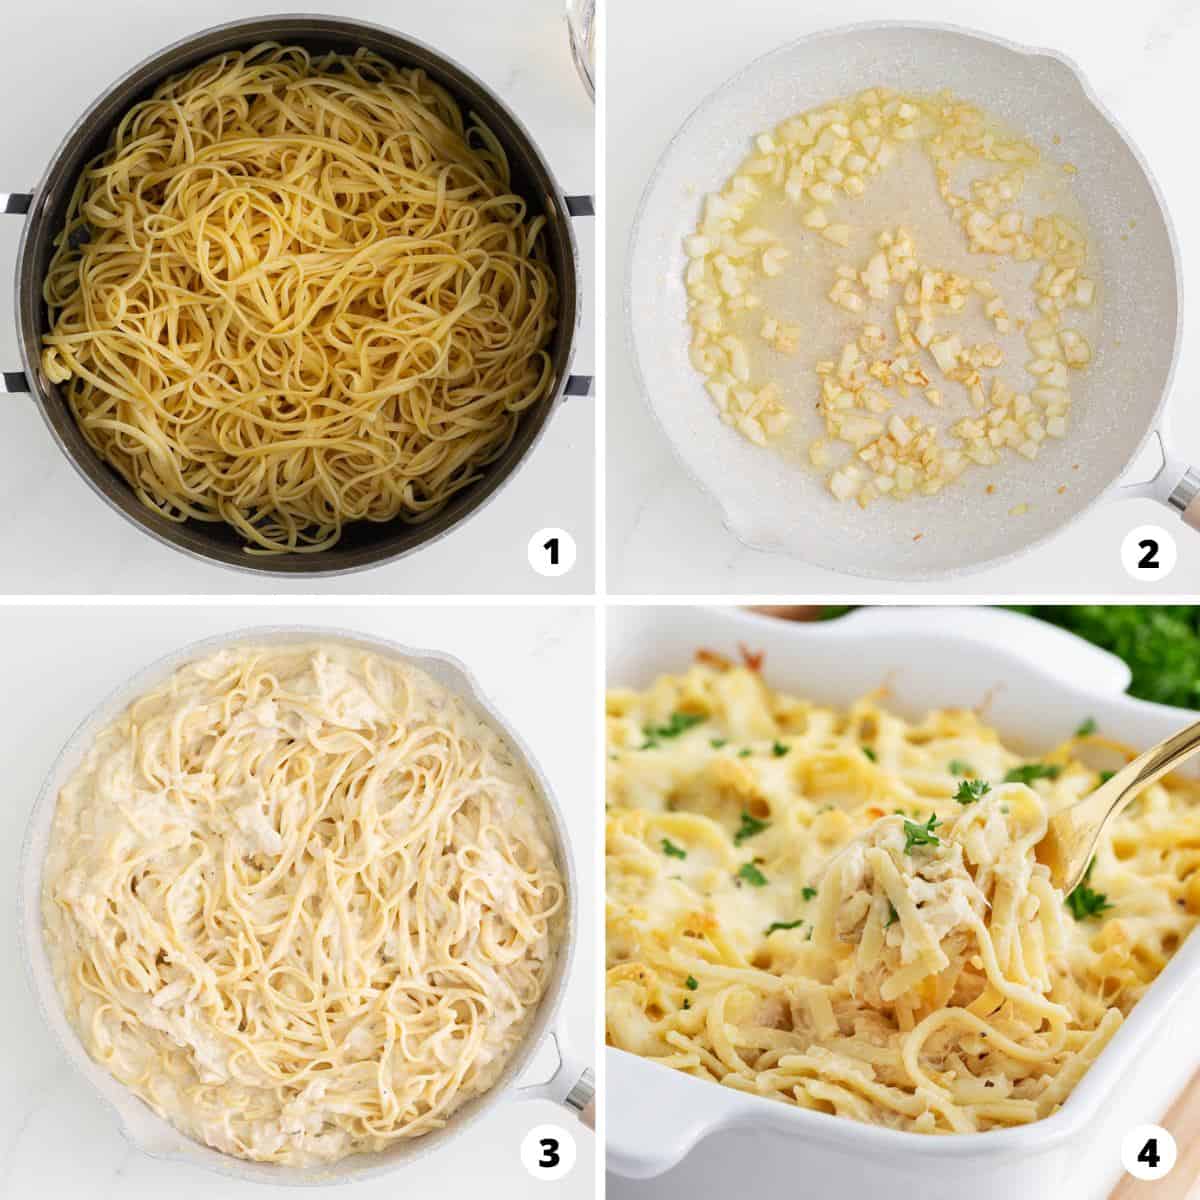 Showing how to make chicken tetrazzini in a 4 step collage.